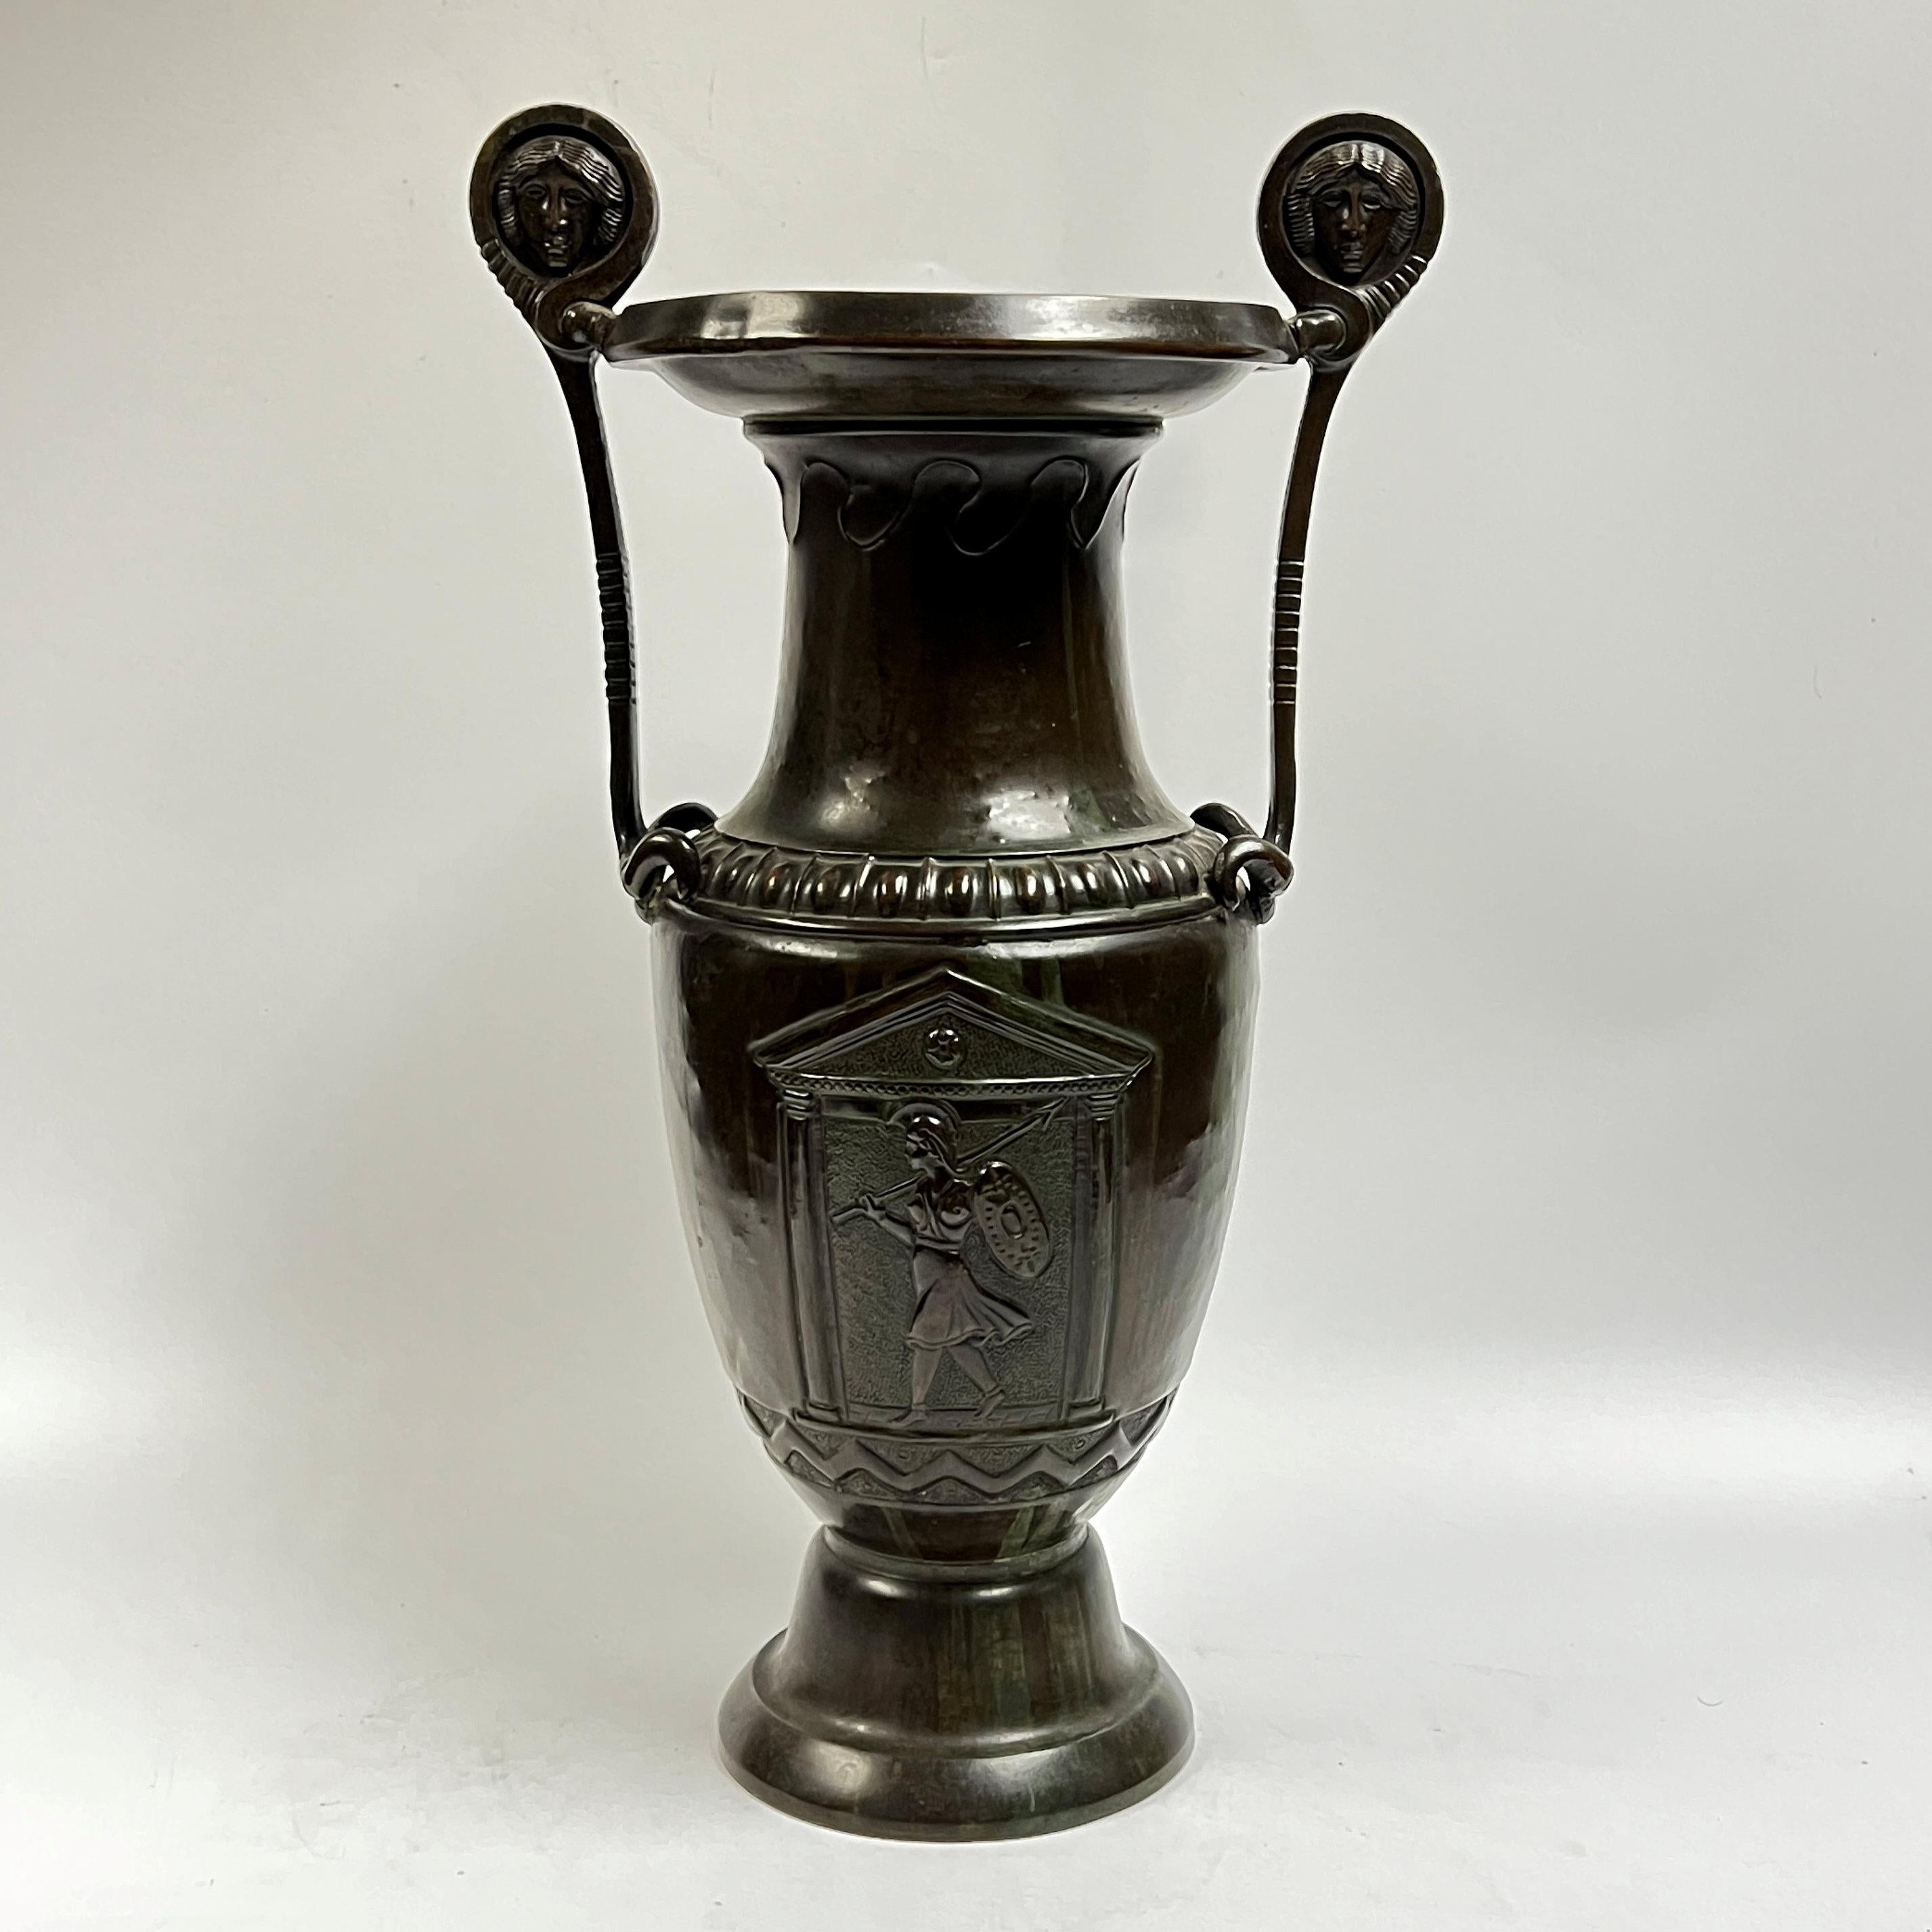 Greek Volute Krater in patinated bronze with cartouches depicting armed soldiers with handles depicting masks.